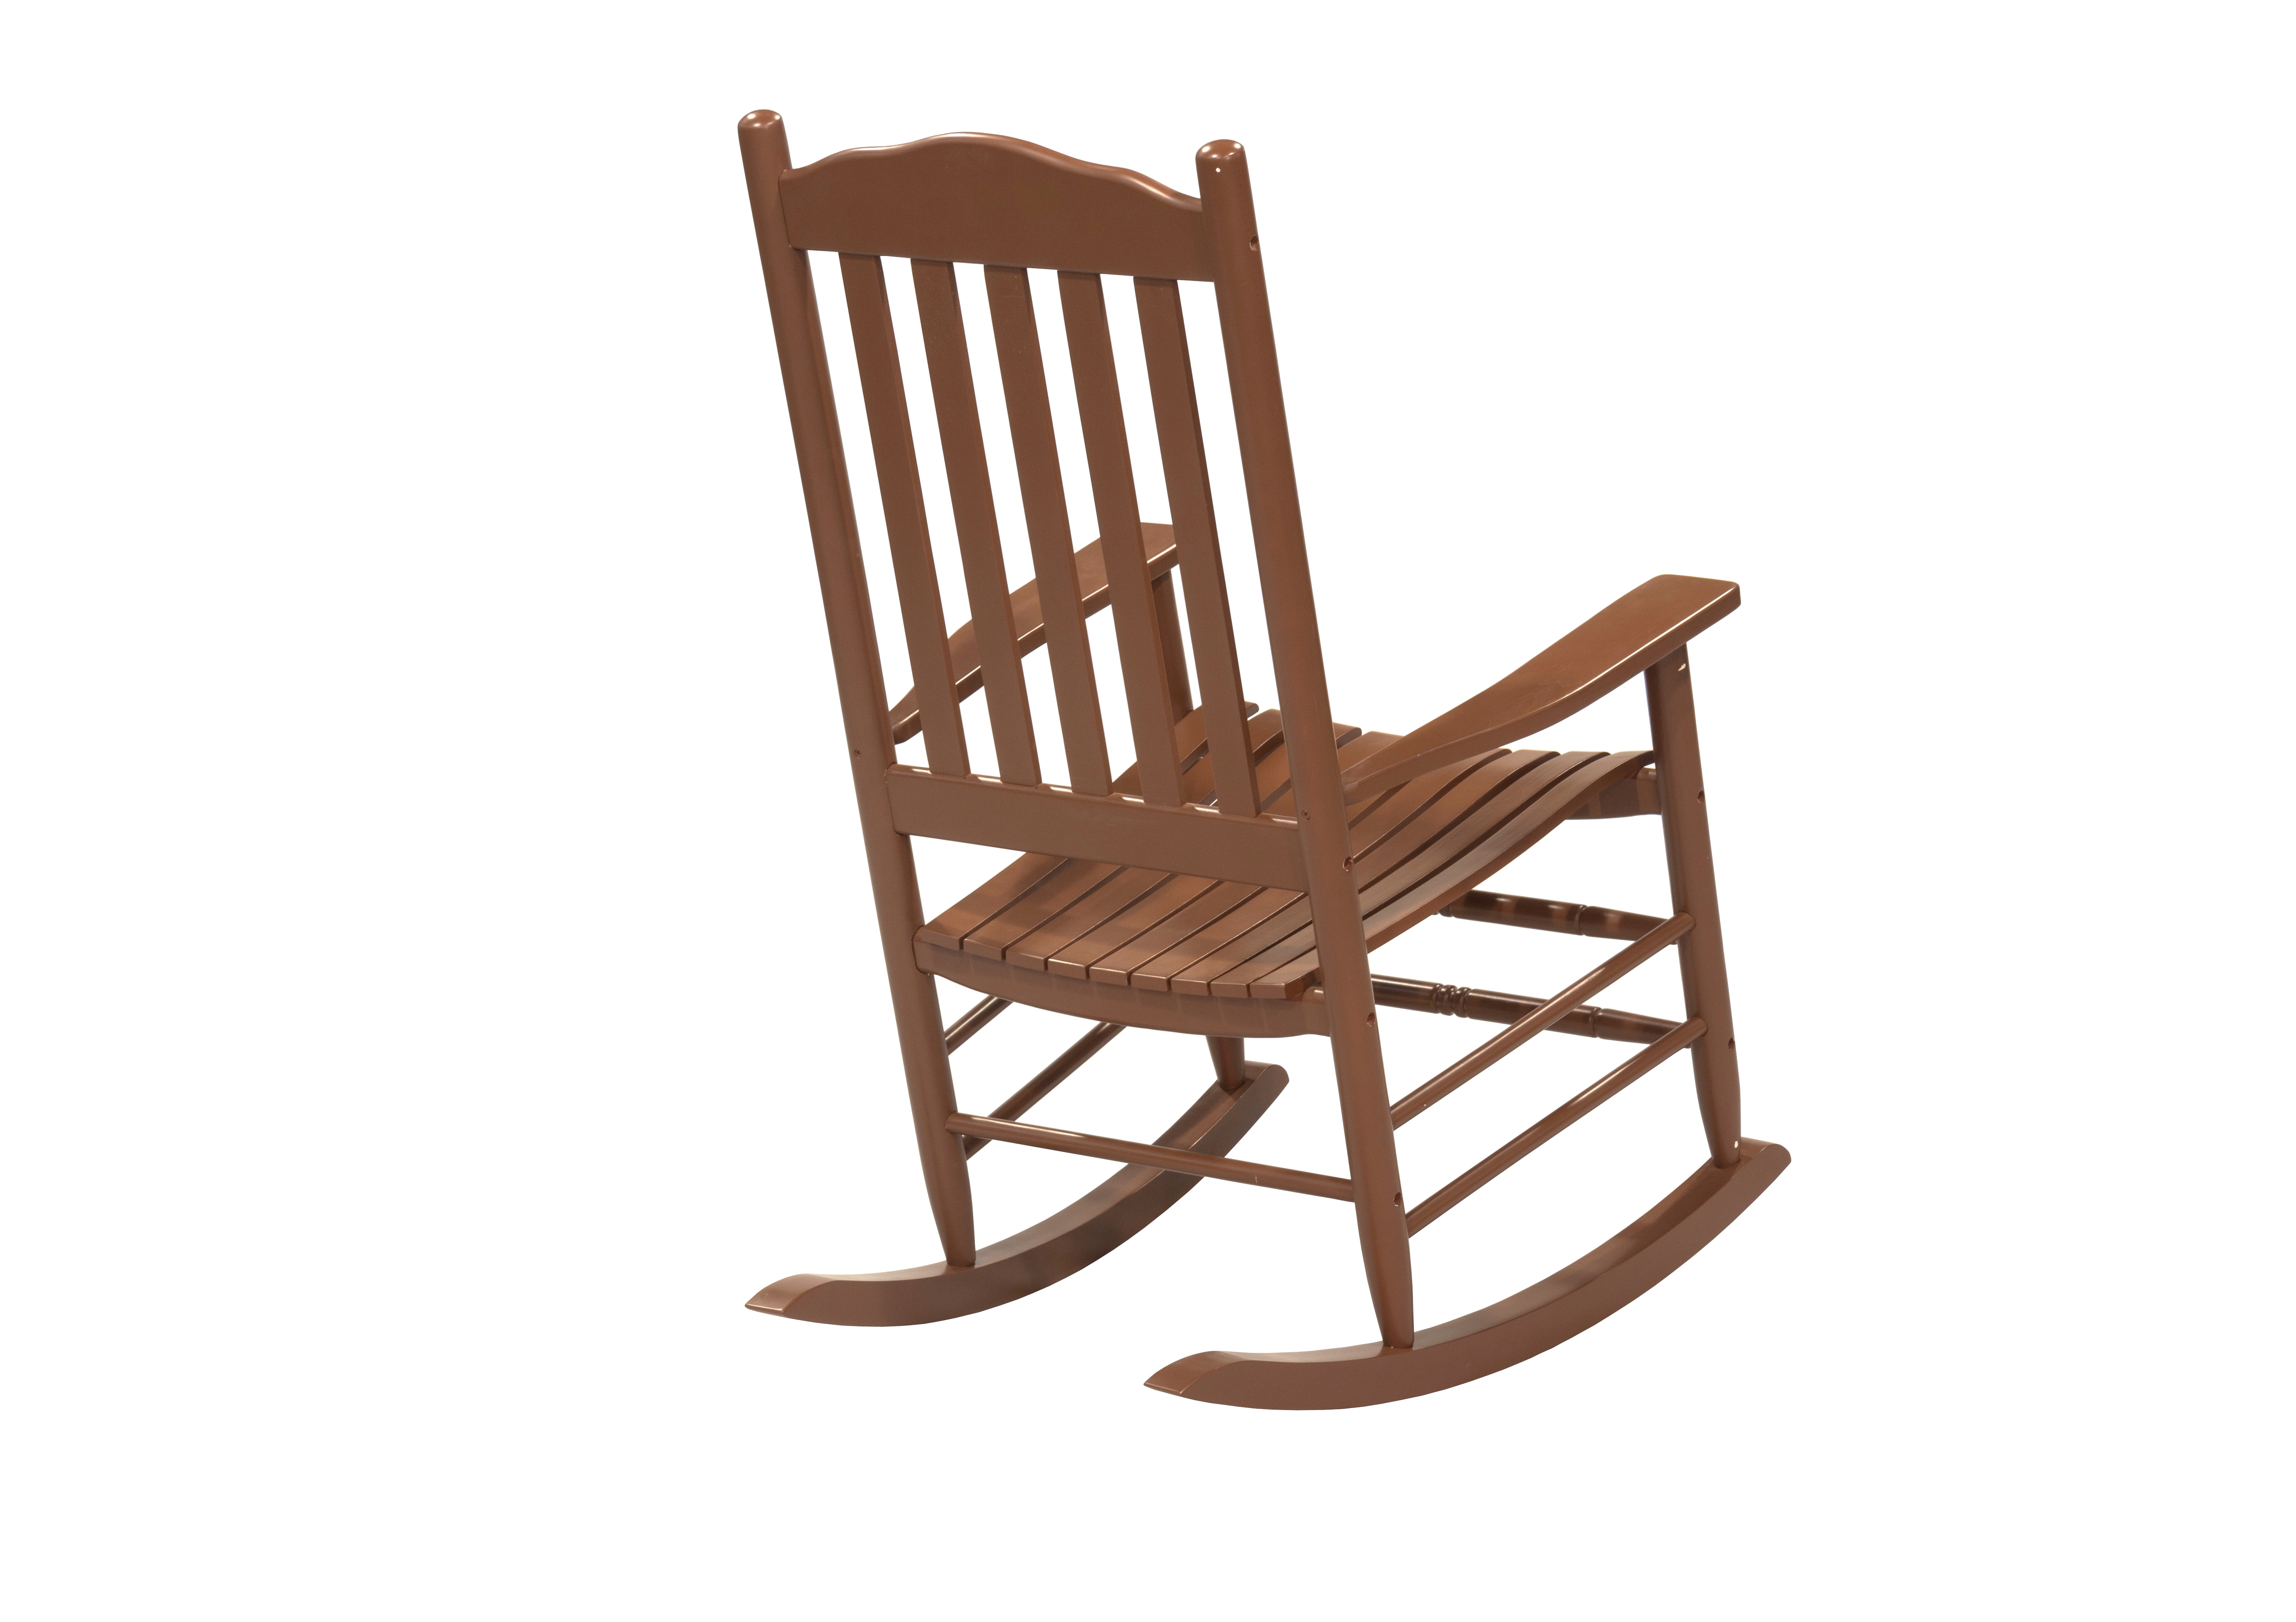 Outdoor Patio Garden Furniture 3-Piece Wood Porch Rocking Chair Set, Weather Resistant Finish,2 Rocking Chairs and 1 Side Table-Brown - image 3 of 11